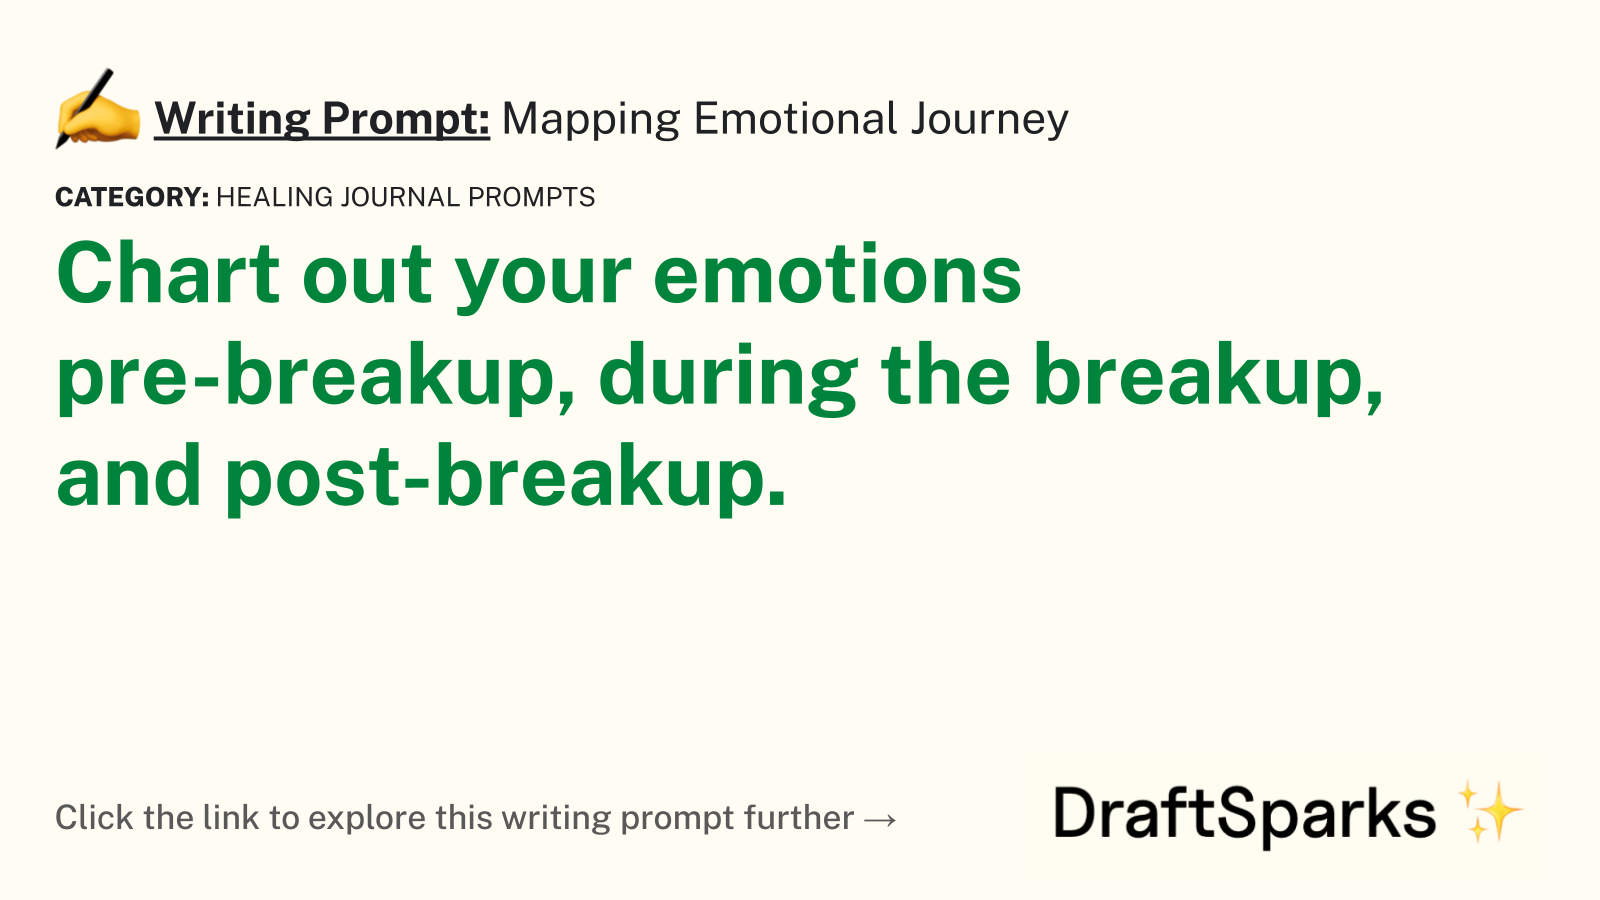 Mapping Emotional Journey